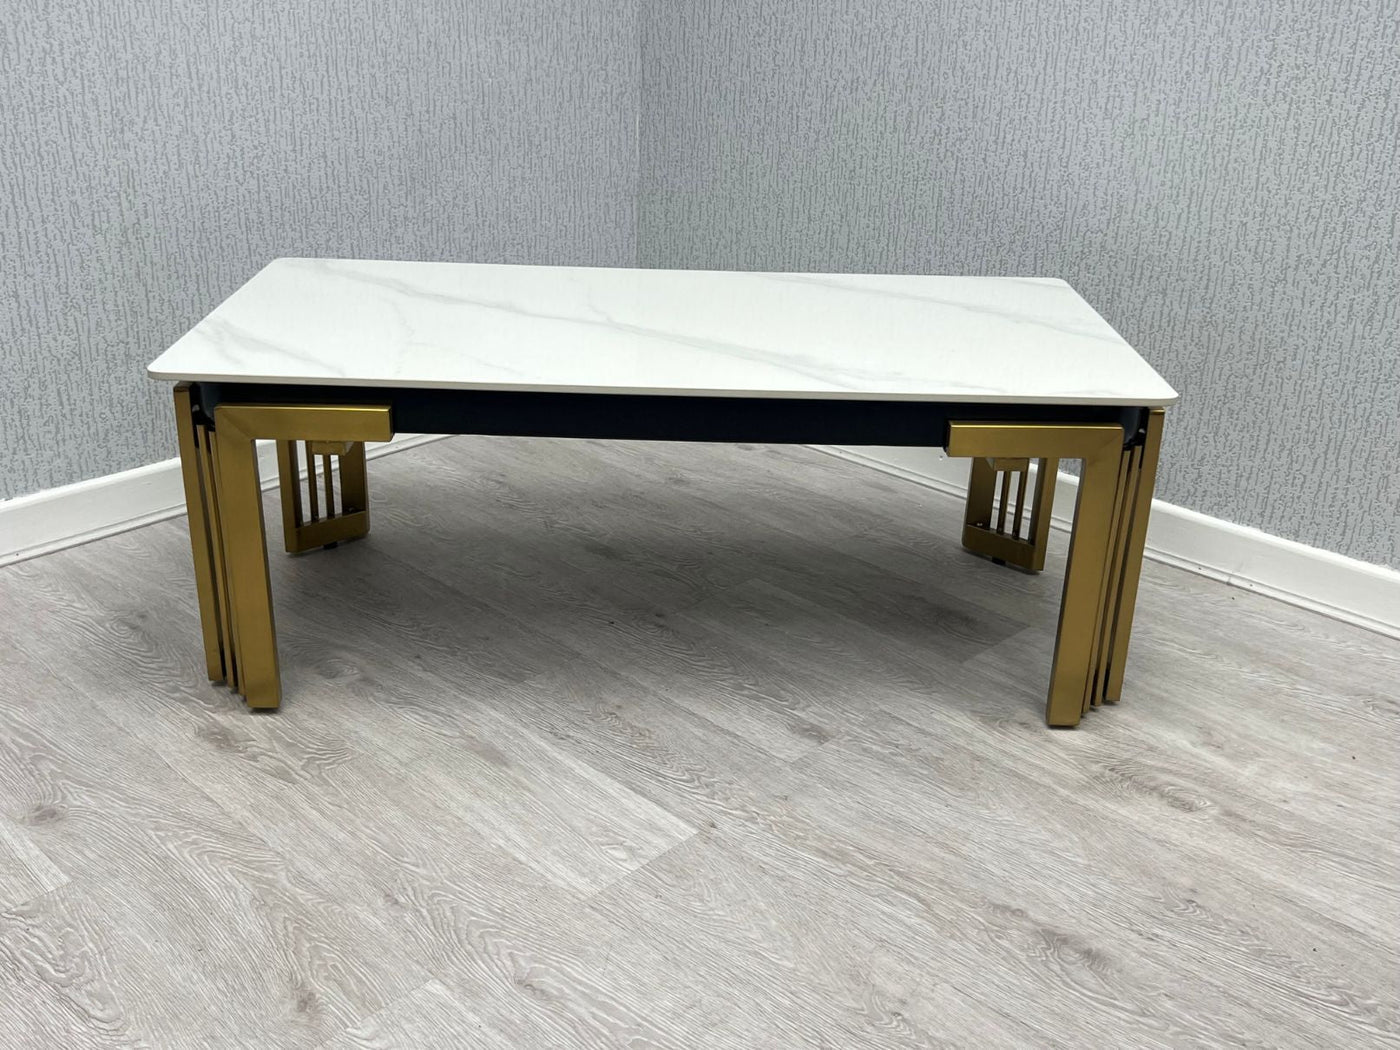 Sorrento 180cm Gold Dining Table with White Ceramic Marble Top + Cream/Gold Lion Knocker Velvet Chairs